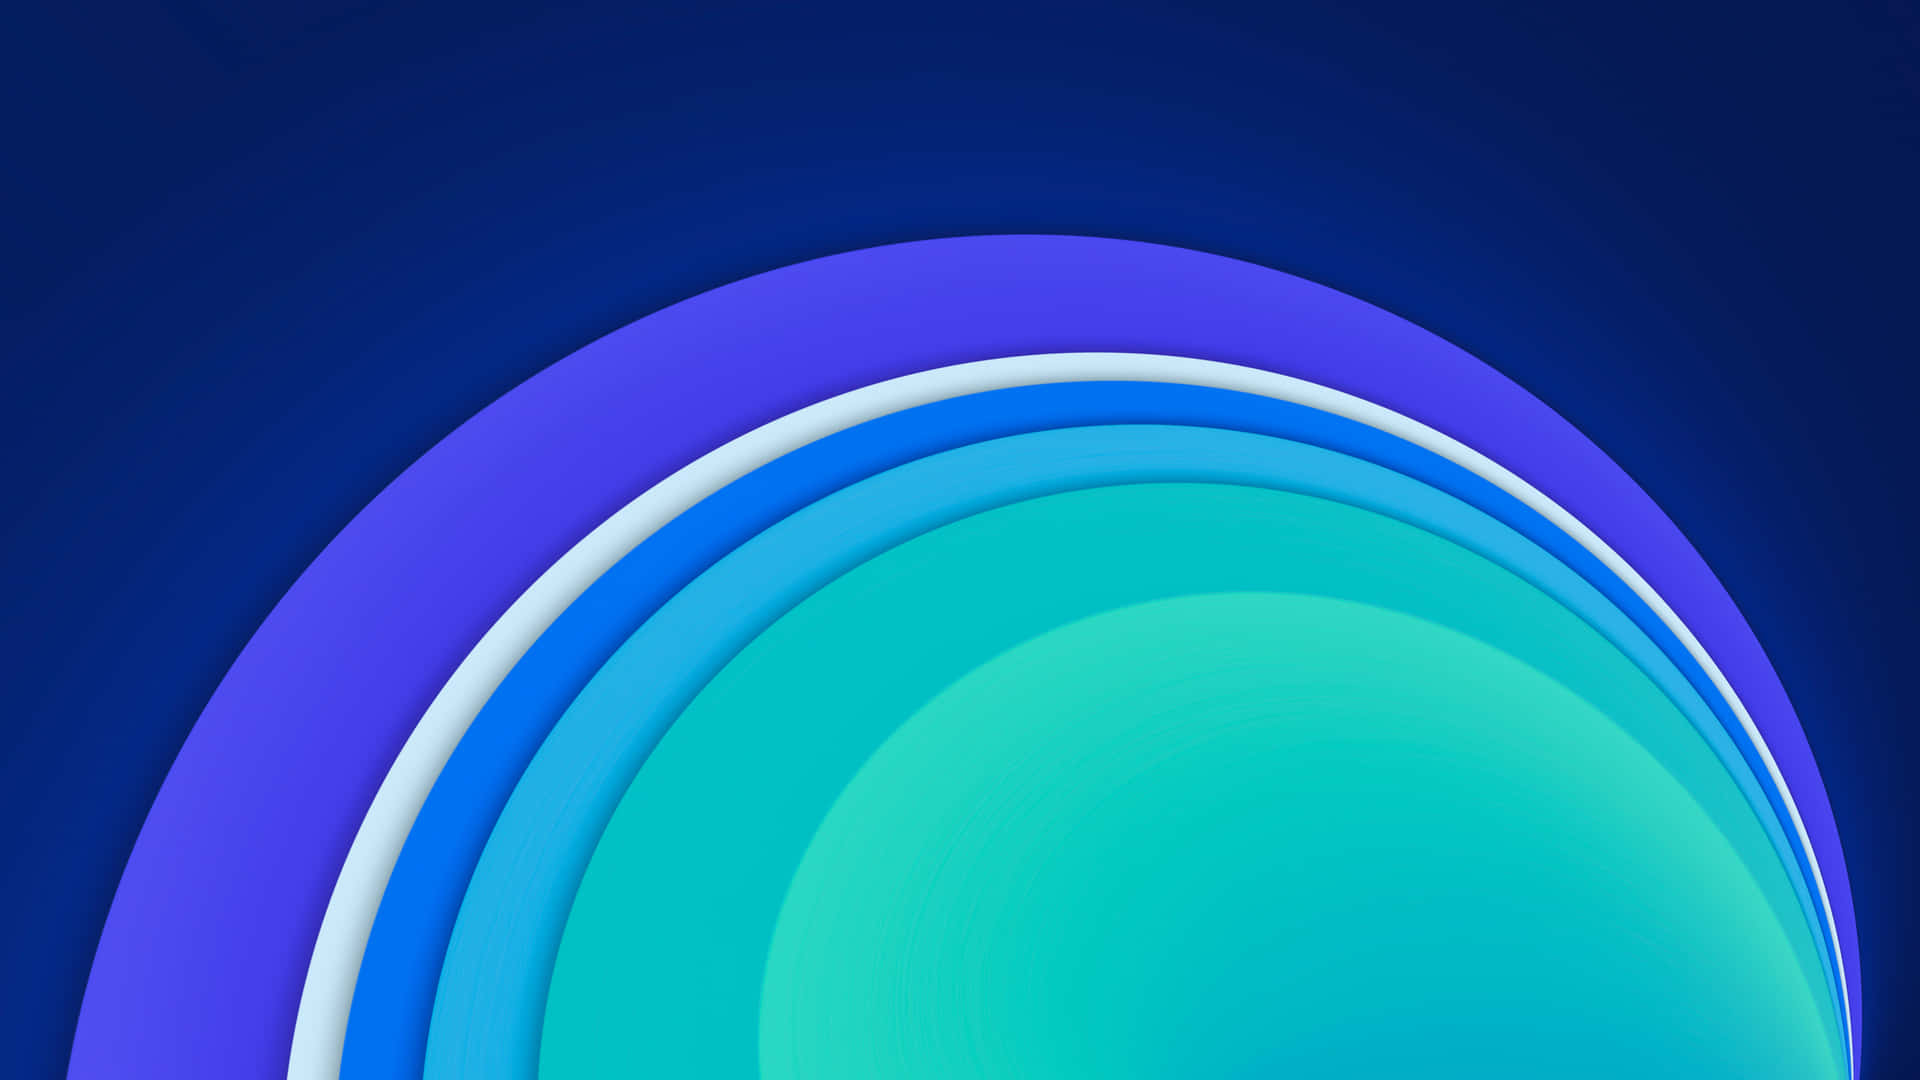 Abstract Blue Circles Gradient Background Wallpaper